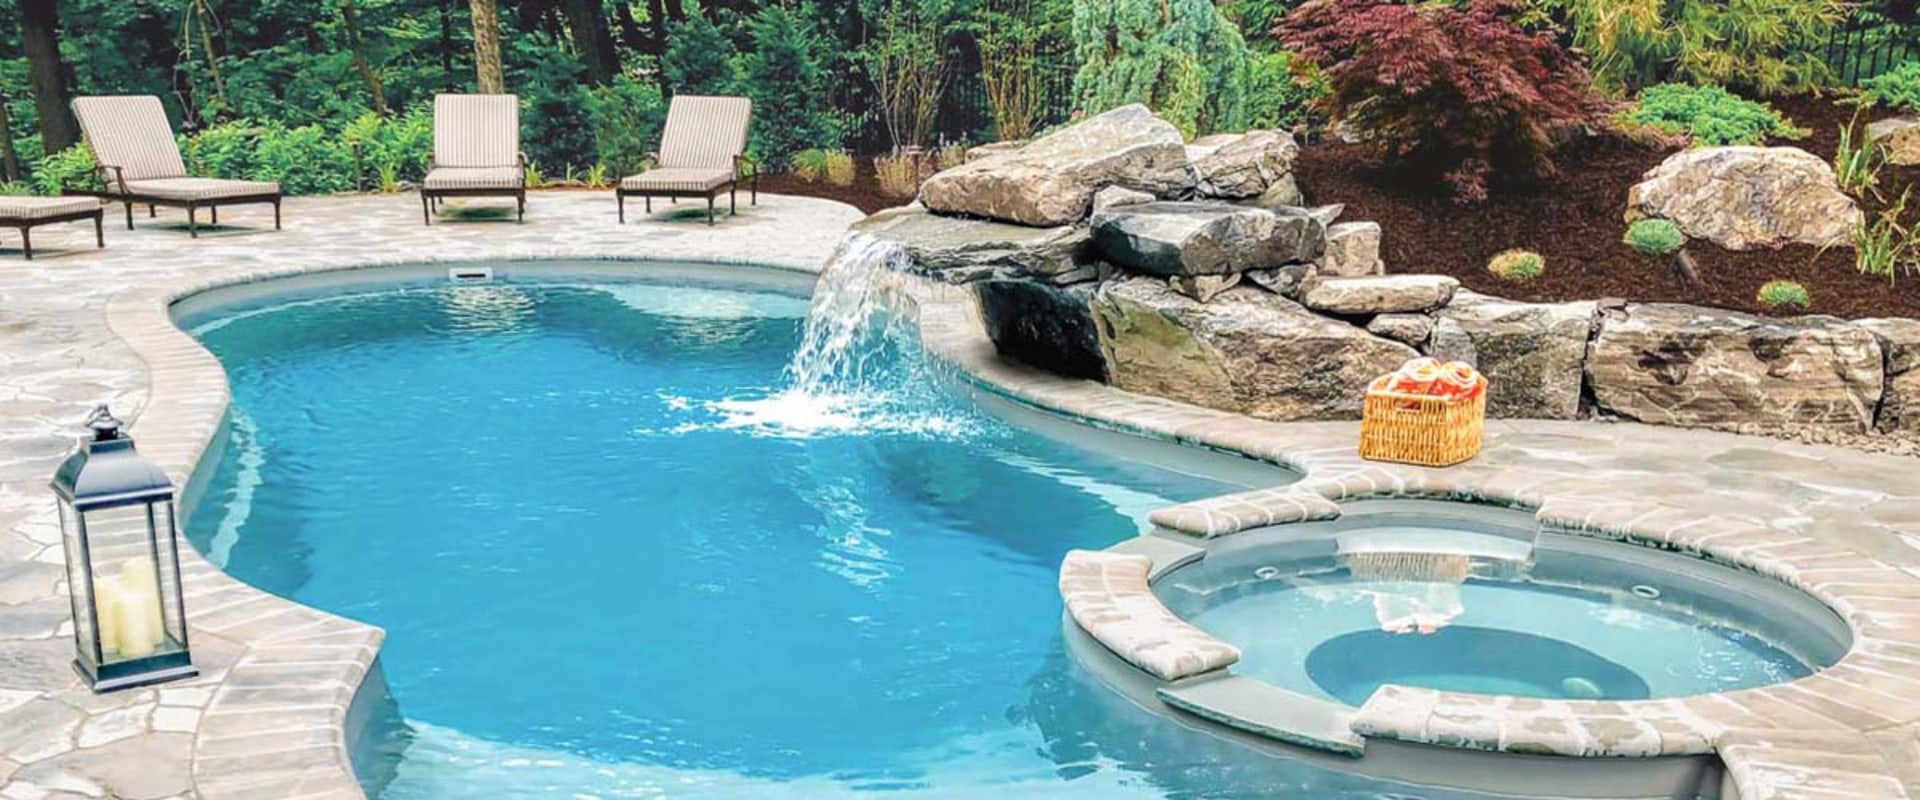 Which type of swimming pool is best?